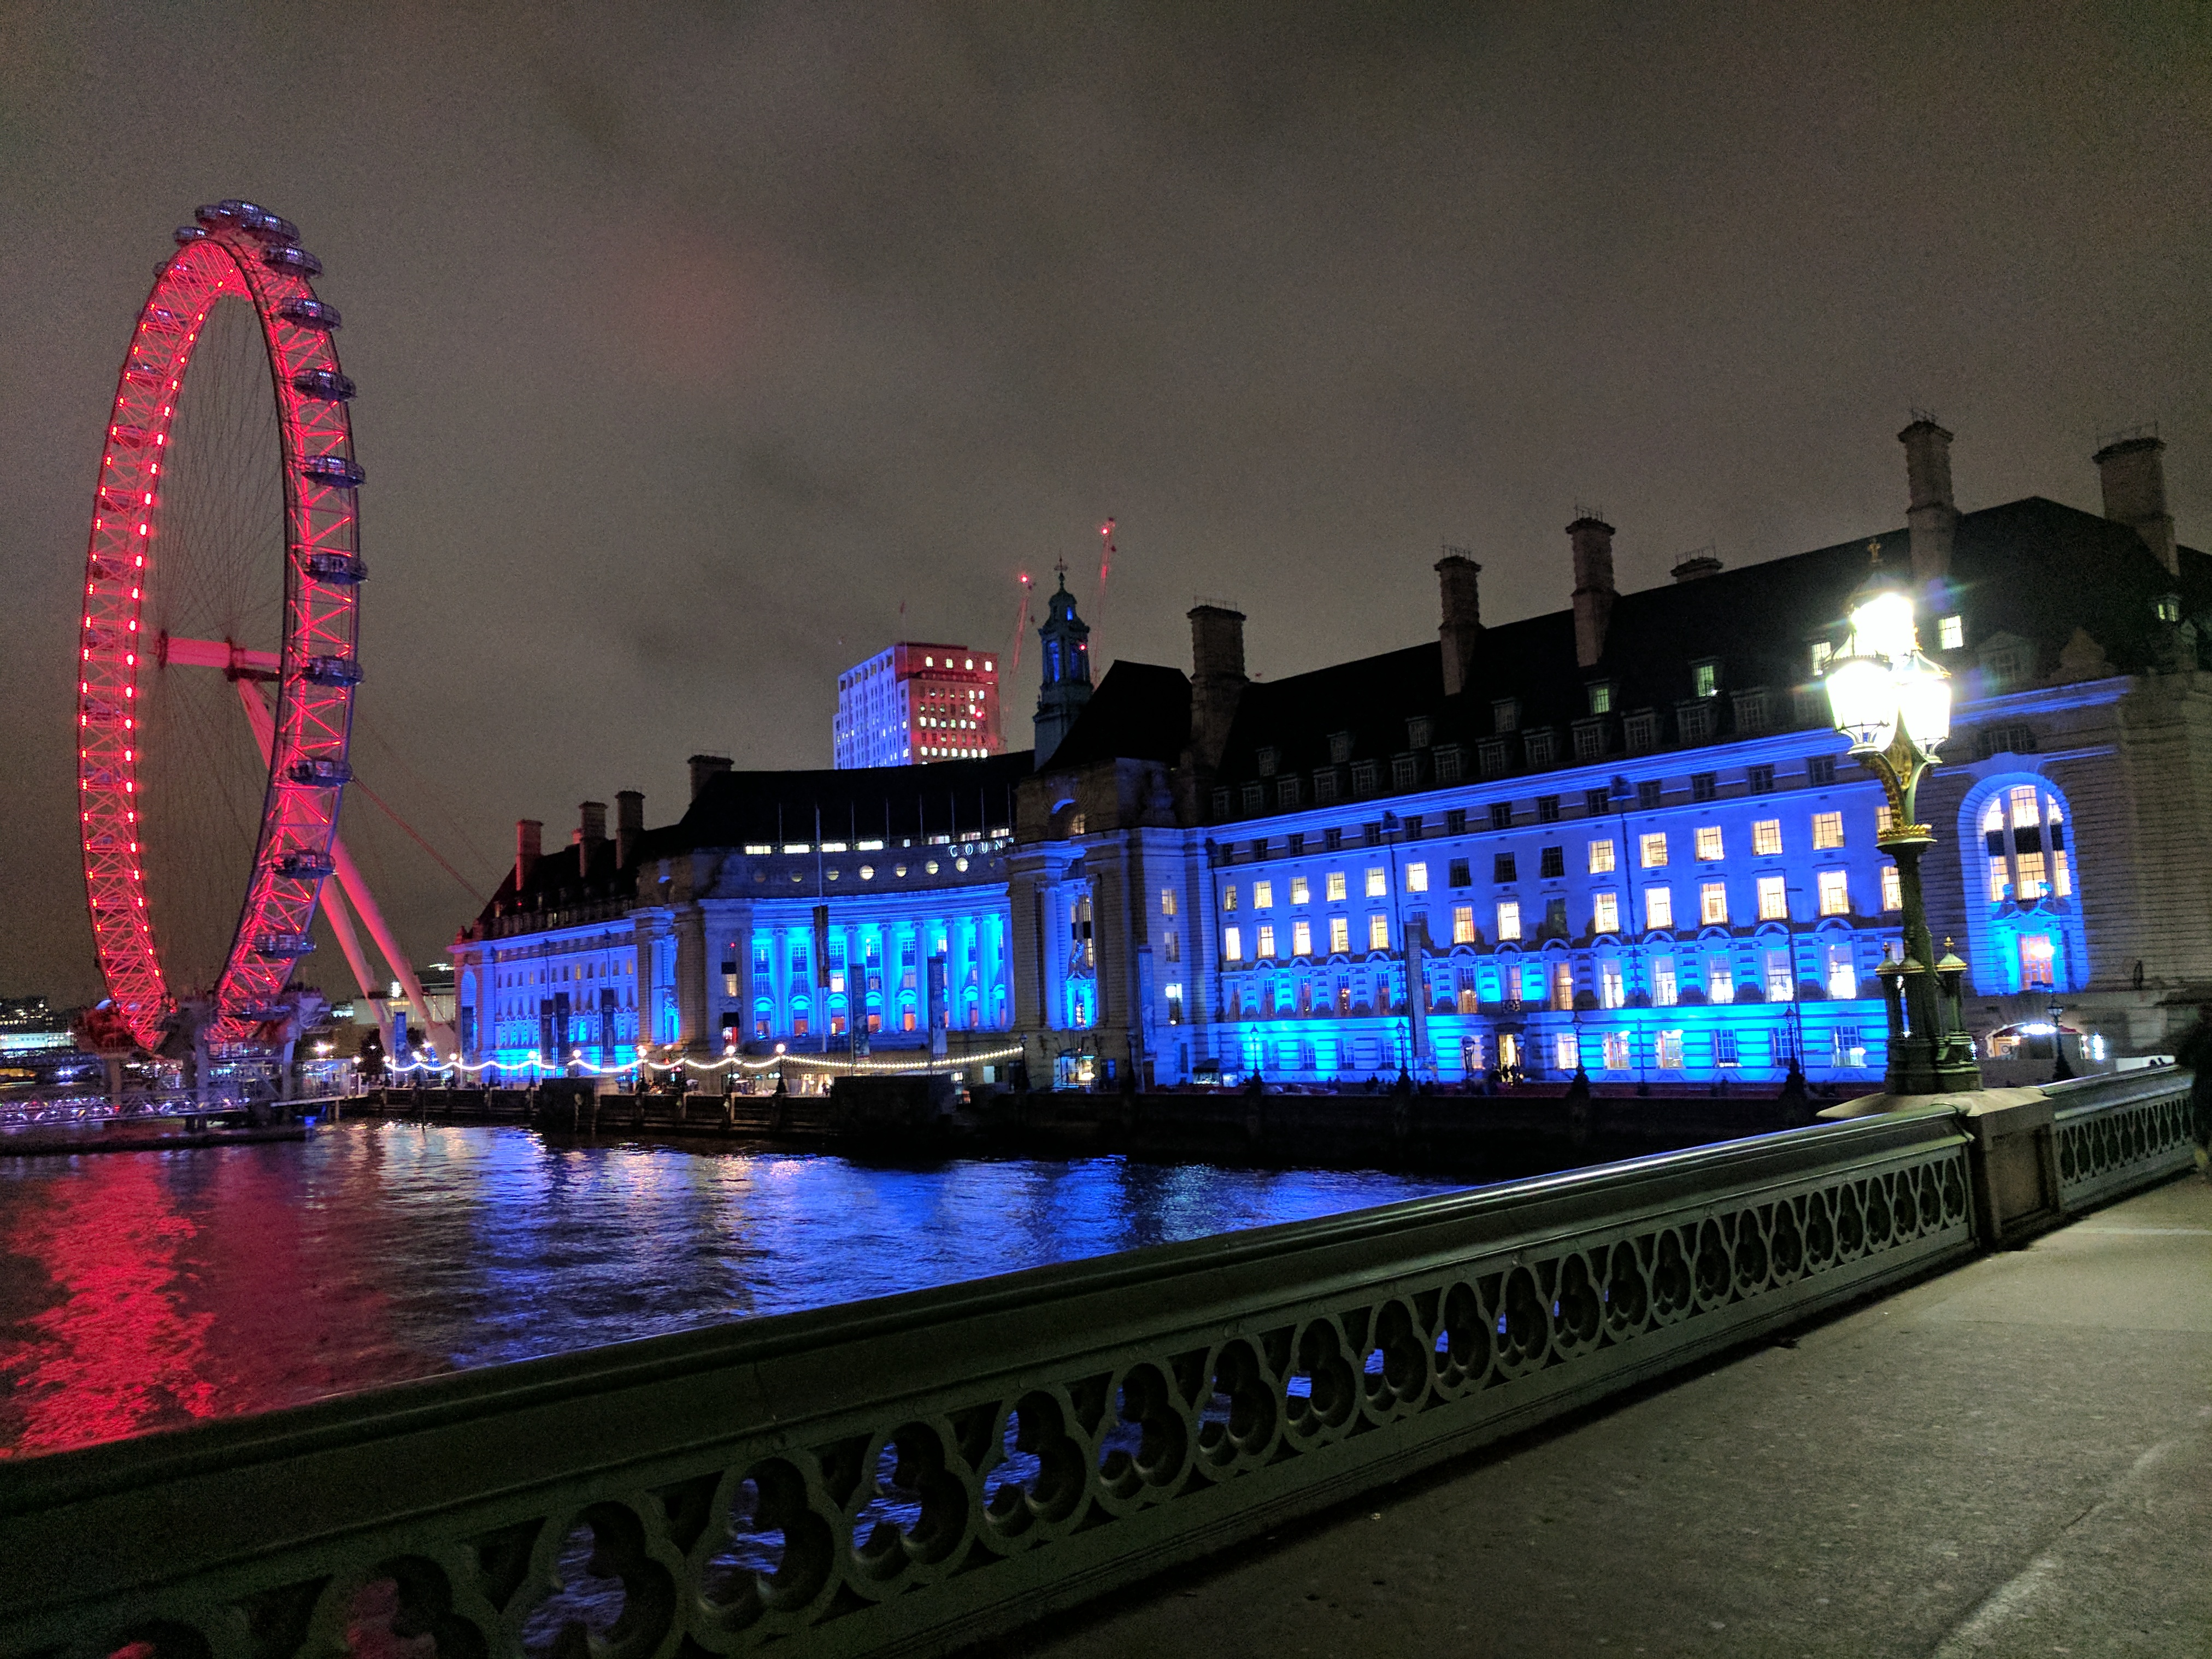 Some thoughts on London: communists, vandalism, and diversity